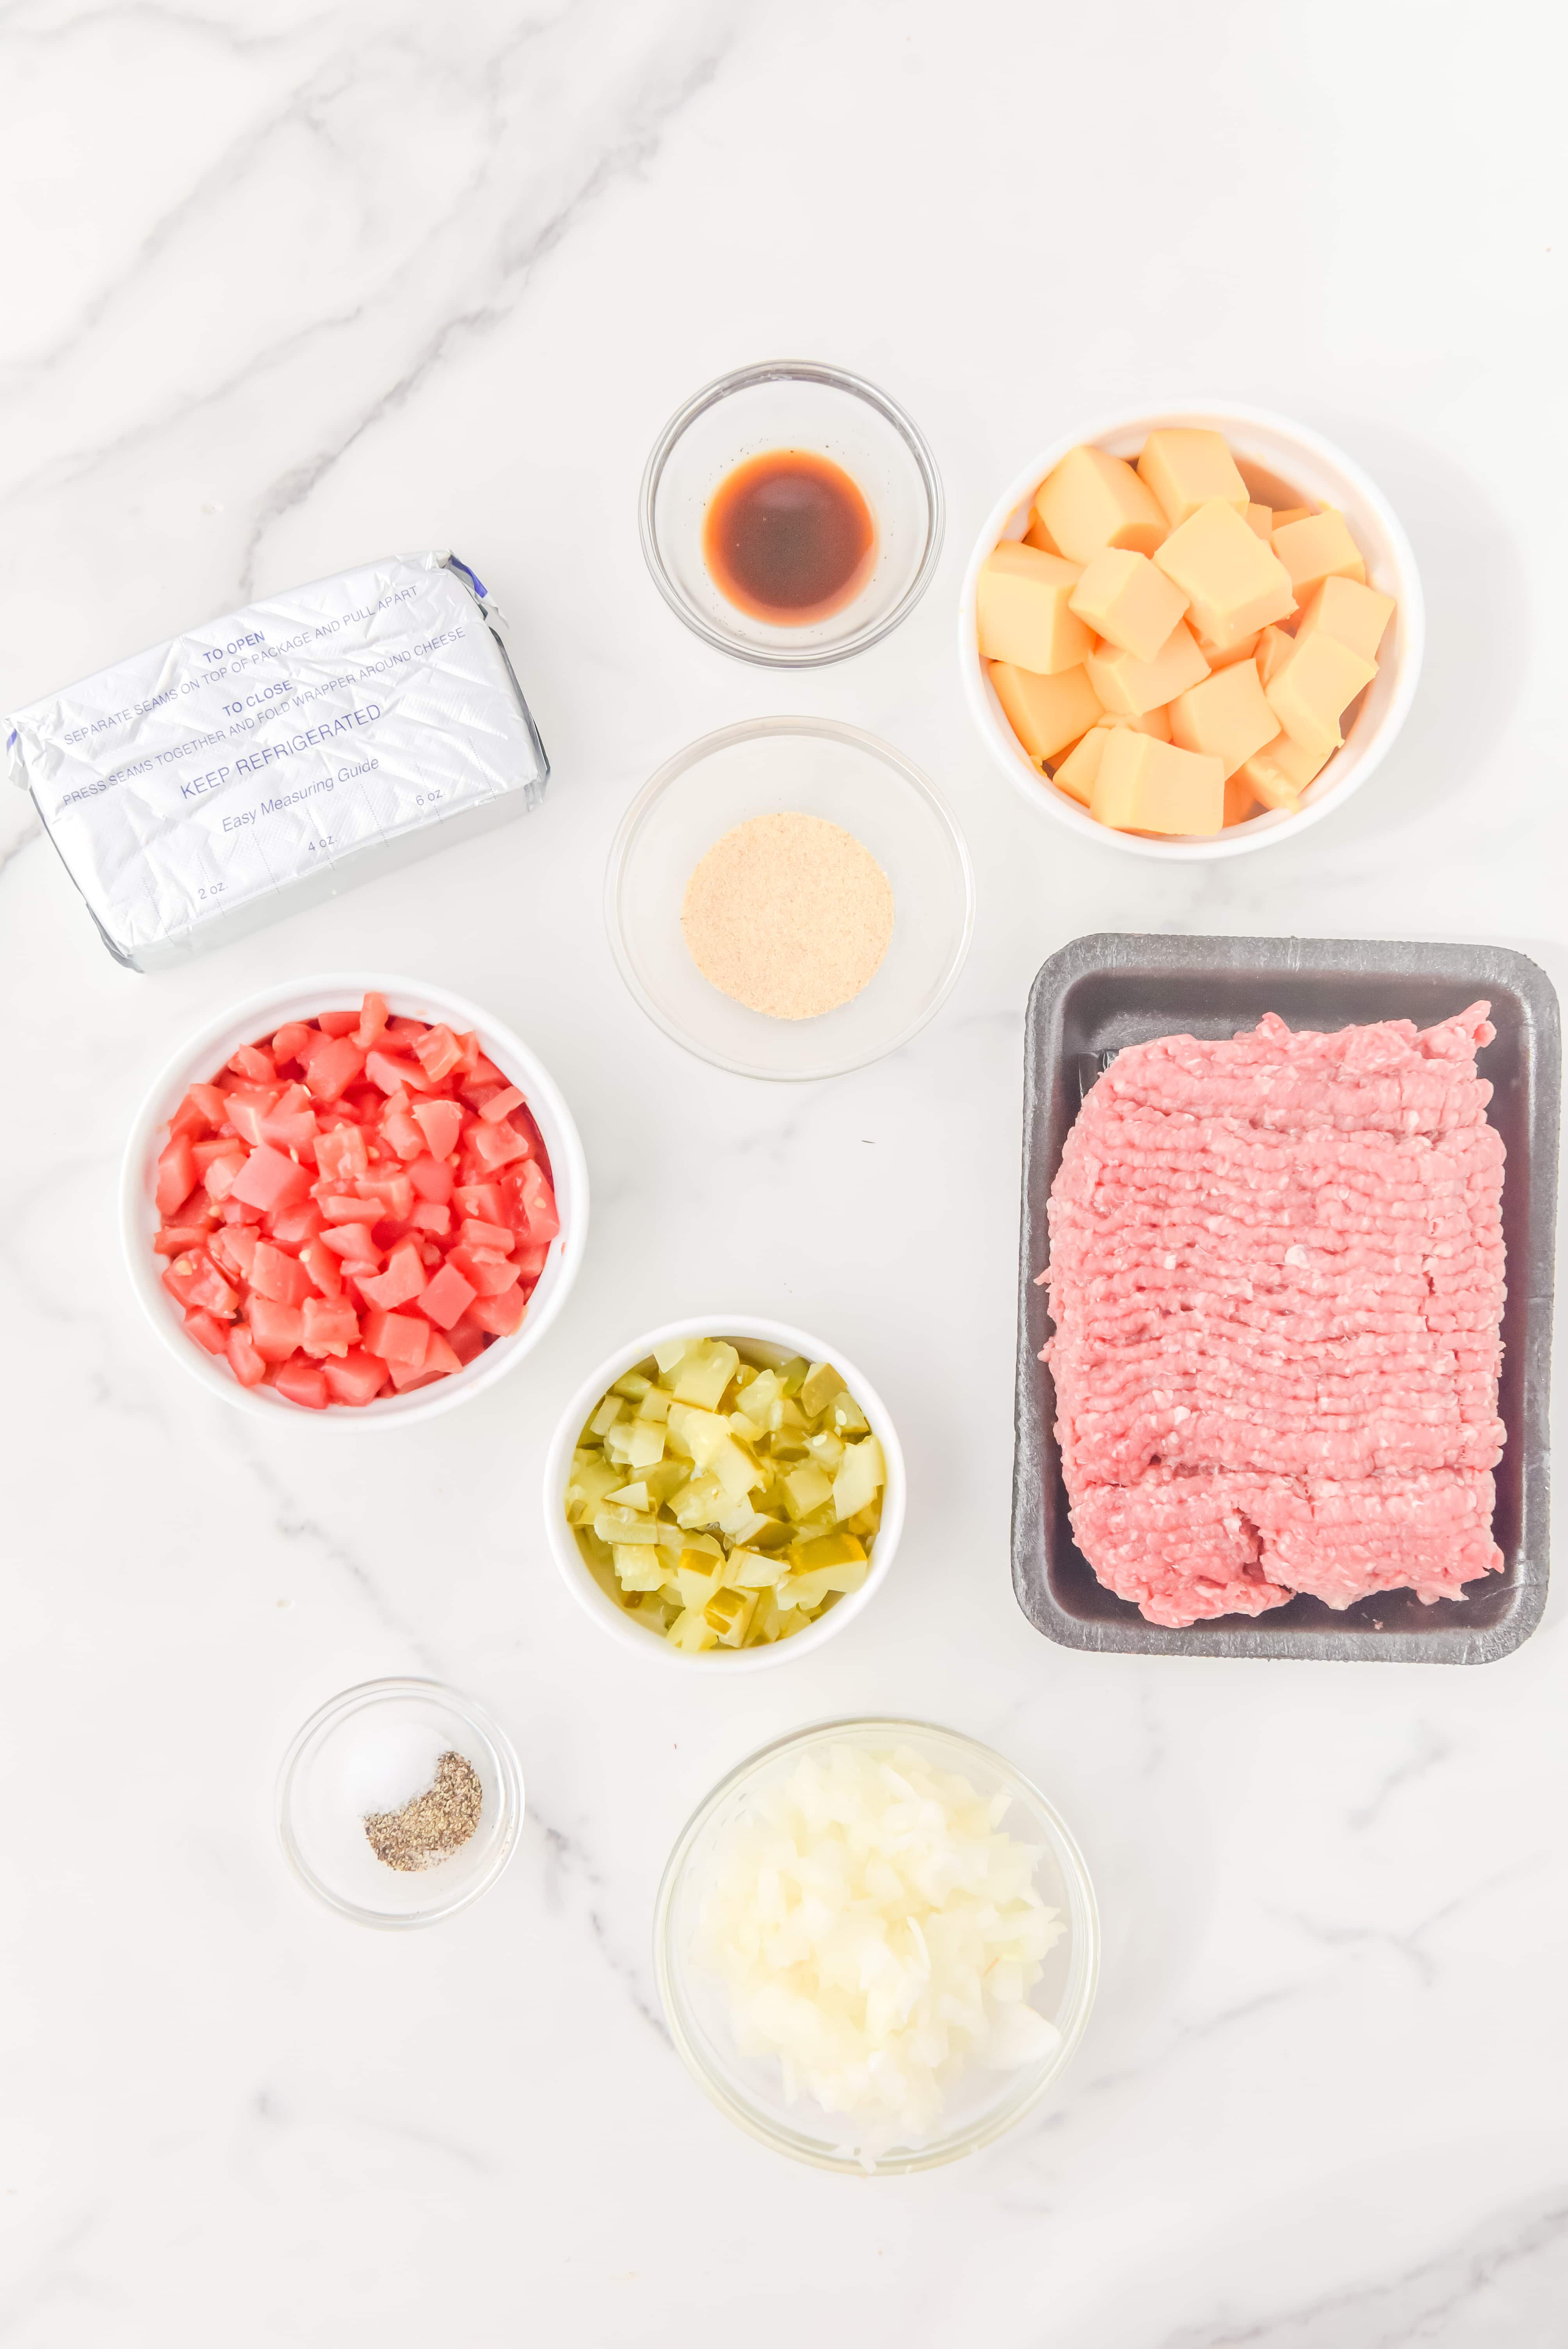 Ingredients for cheeseburger dip on a marble counter